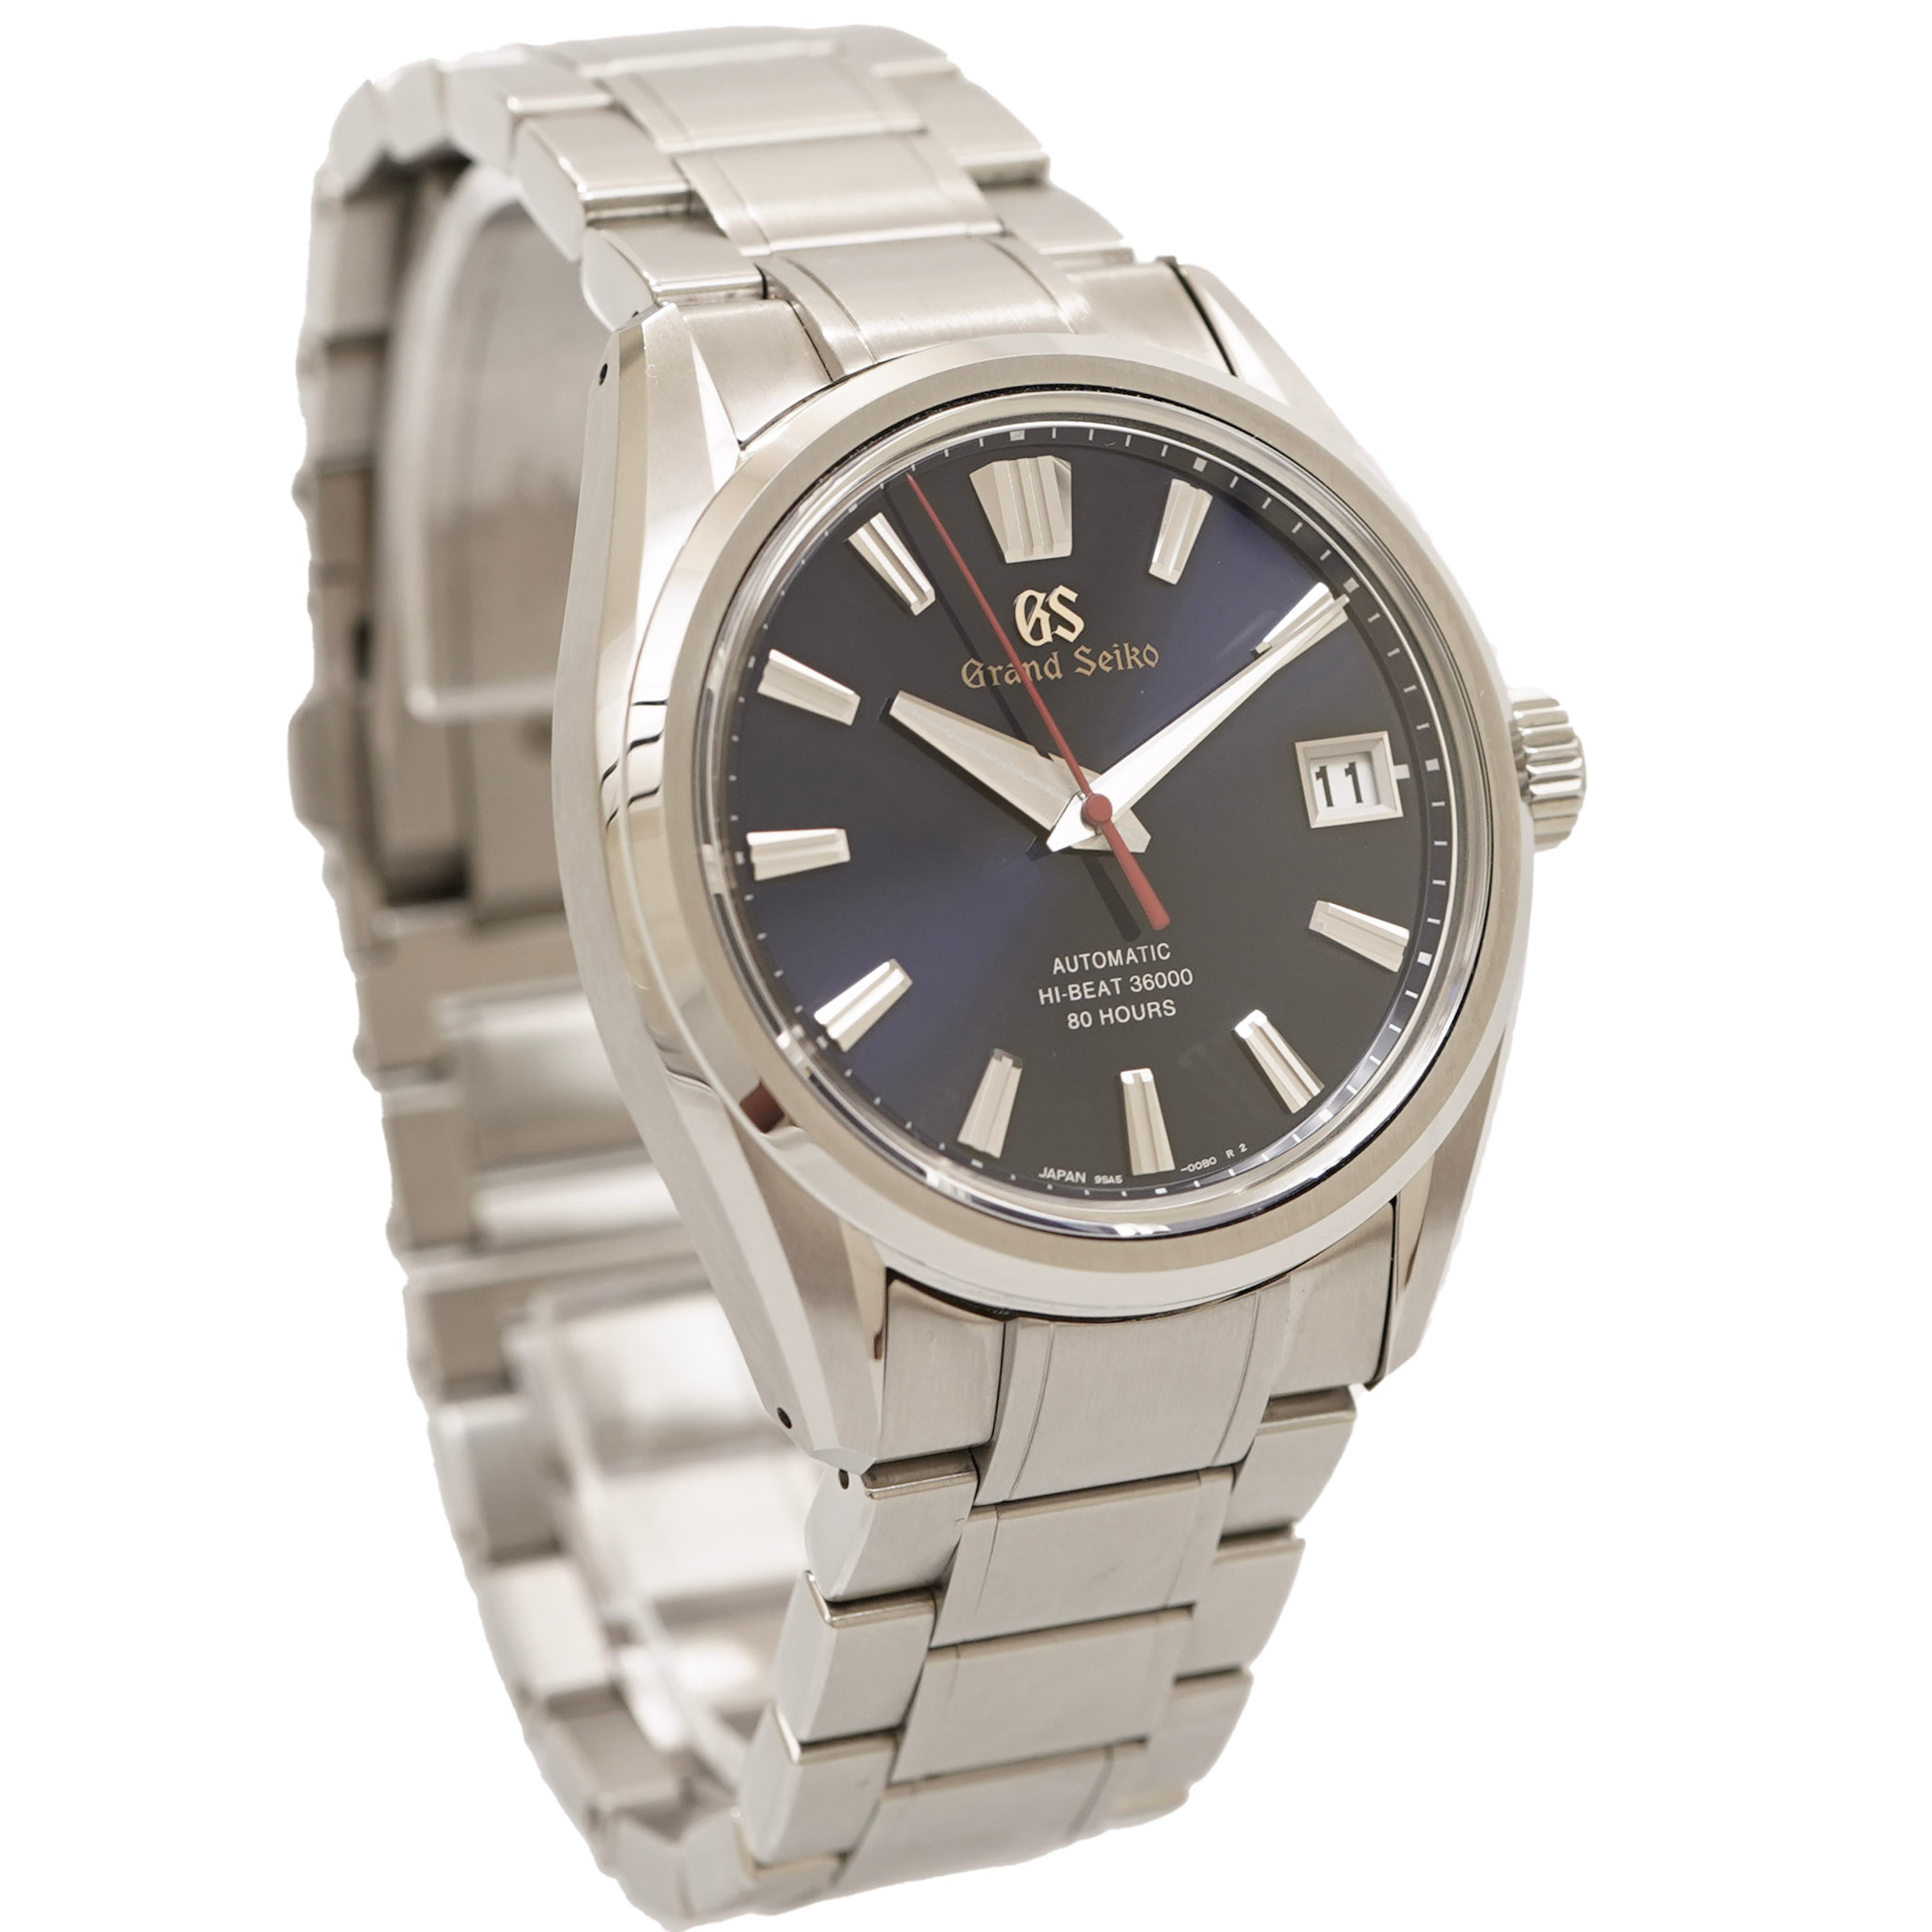 Grand Seiko 60th Anniversary Limited Edition Hi-beat 36000 80 Hours  *Limited Edition* - Inventory 3389 